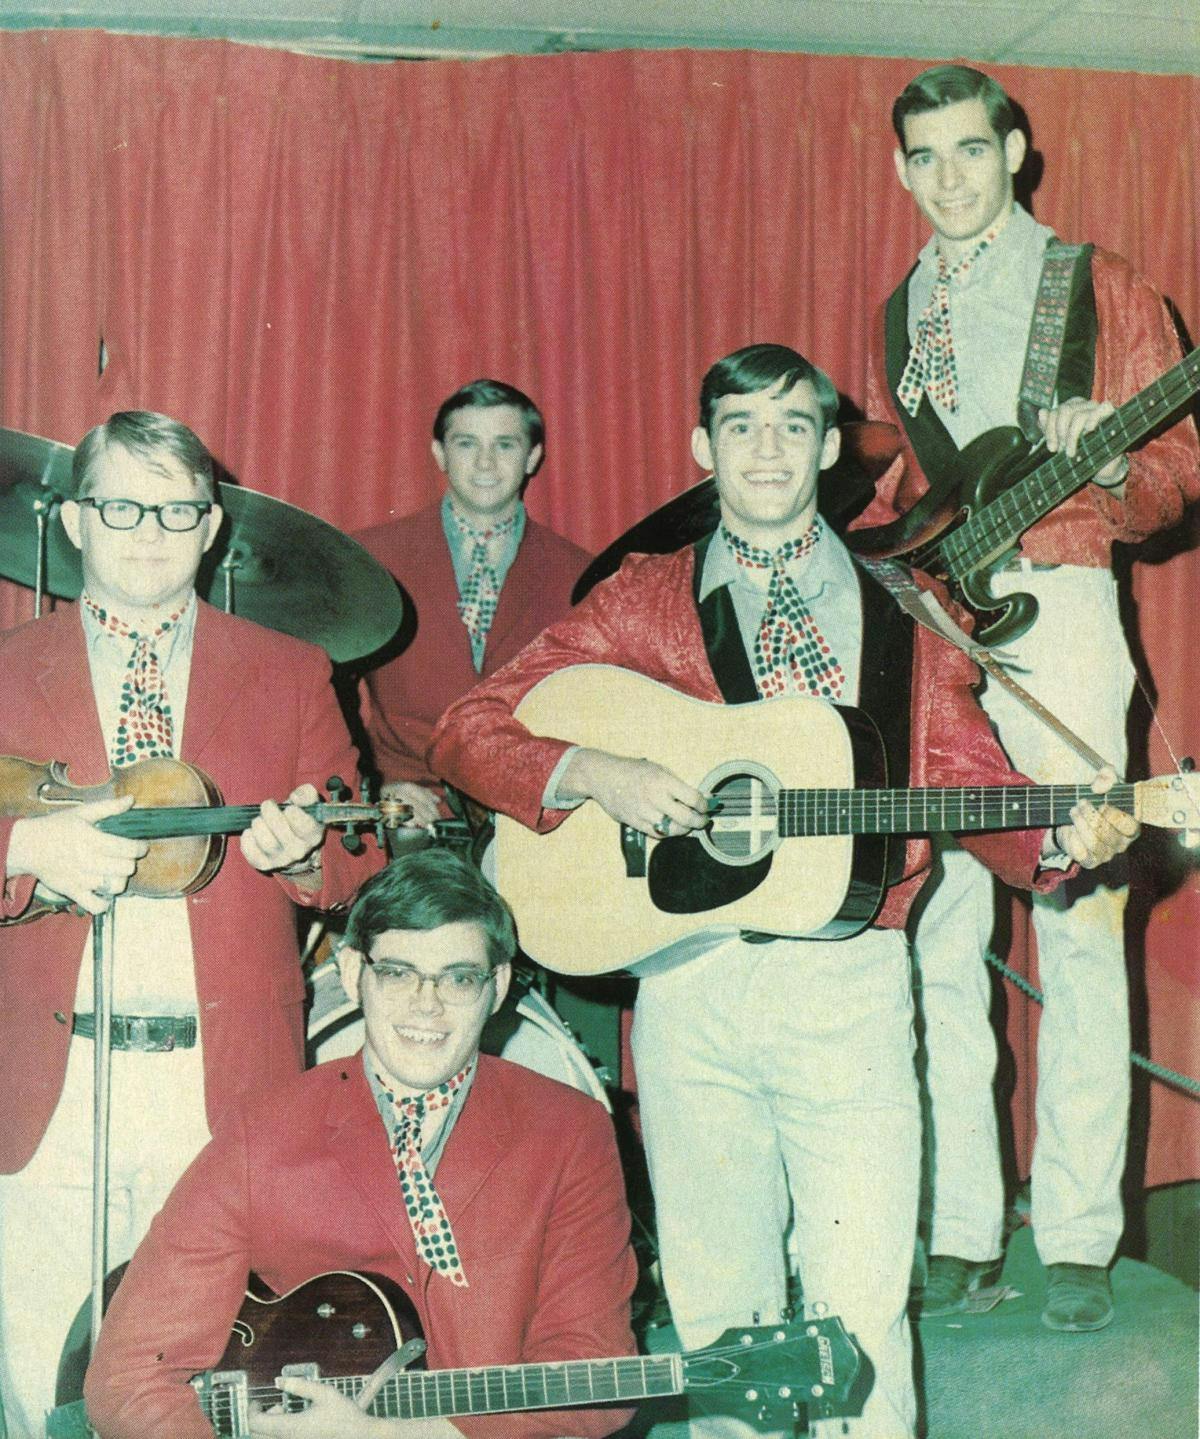 1969: The new Maines Brothers Band. From left, Joe Stephenson, Lloyd Maines, John Dwyer, Steve Maines, Kenny Maines.